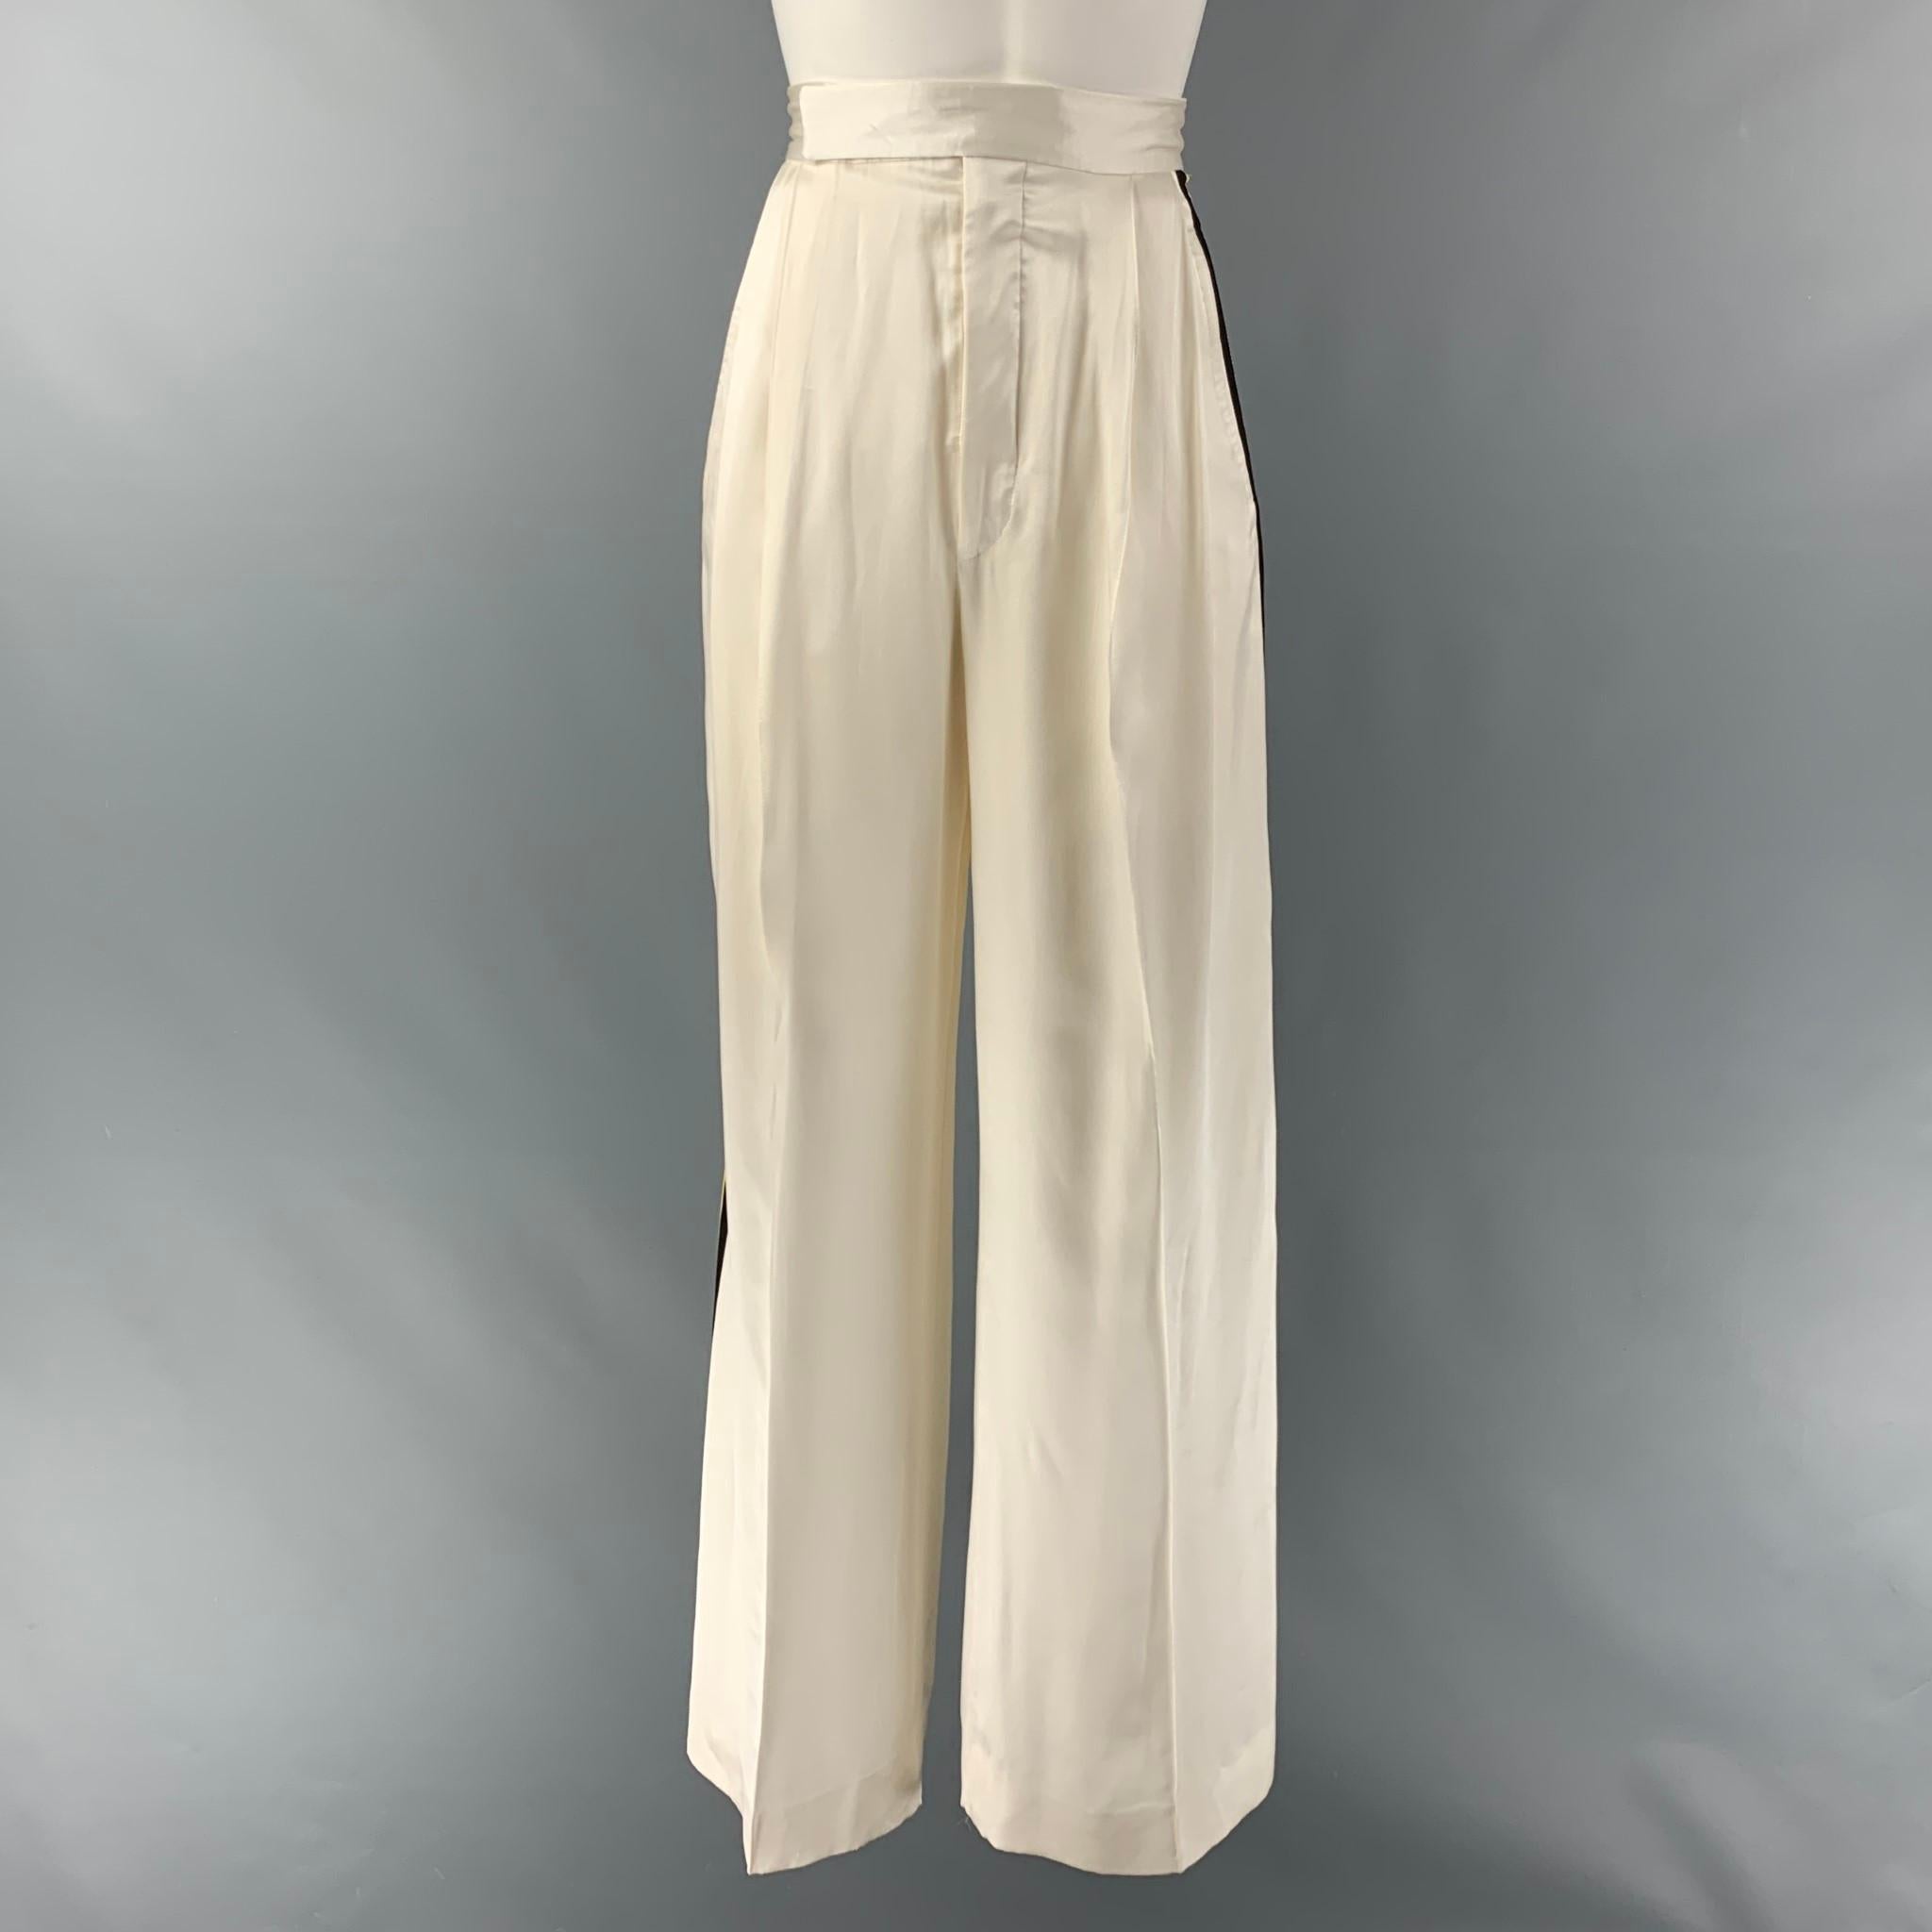 CELINE dress pants comes in a cream silk satin fabric featuring a multi- color trim stripes details, wide leg, high waist, and a front tab and a zip fly closure. Made in Italy.

Excellent Pre-Owned Condition.
Marked: 34

Measurements:

Waist: 24